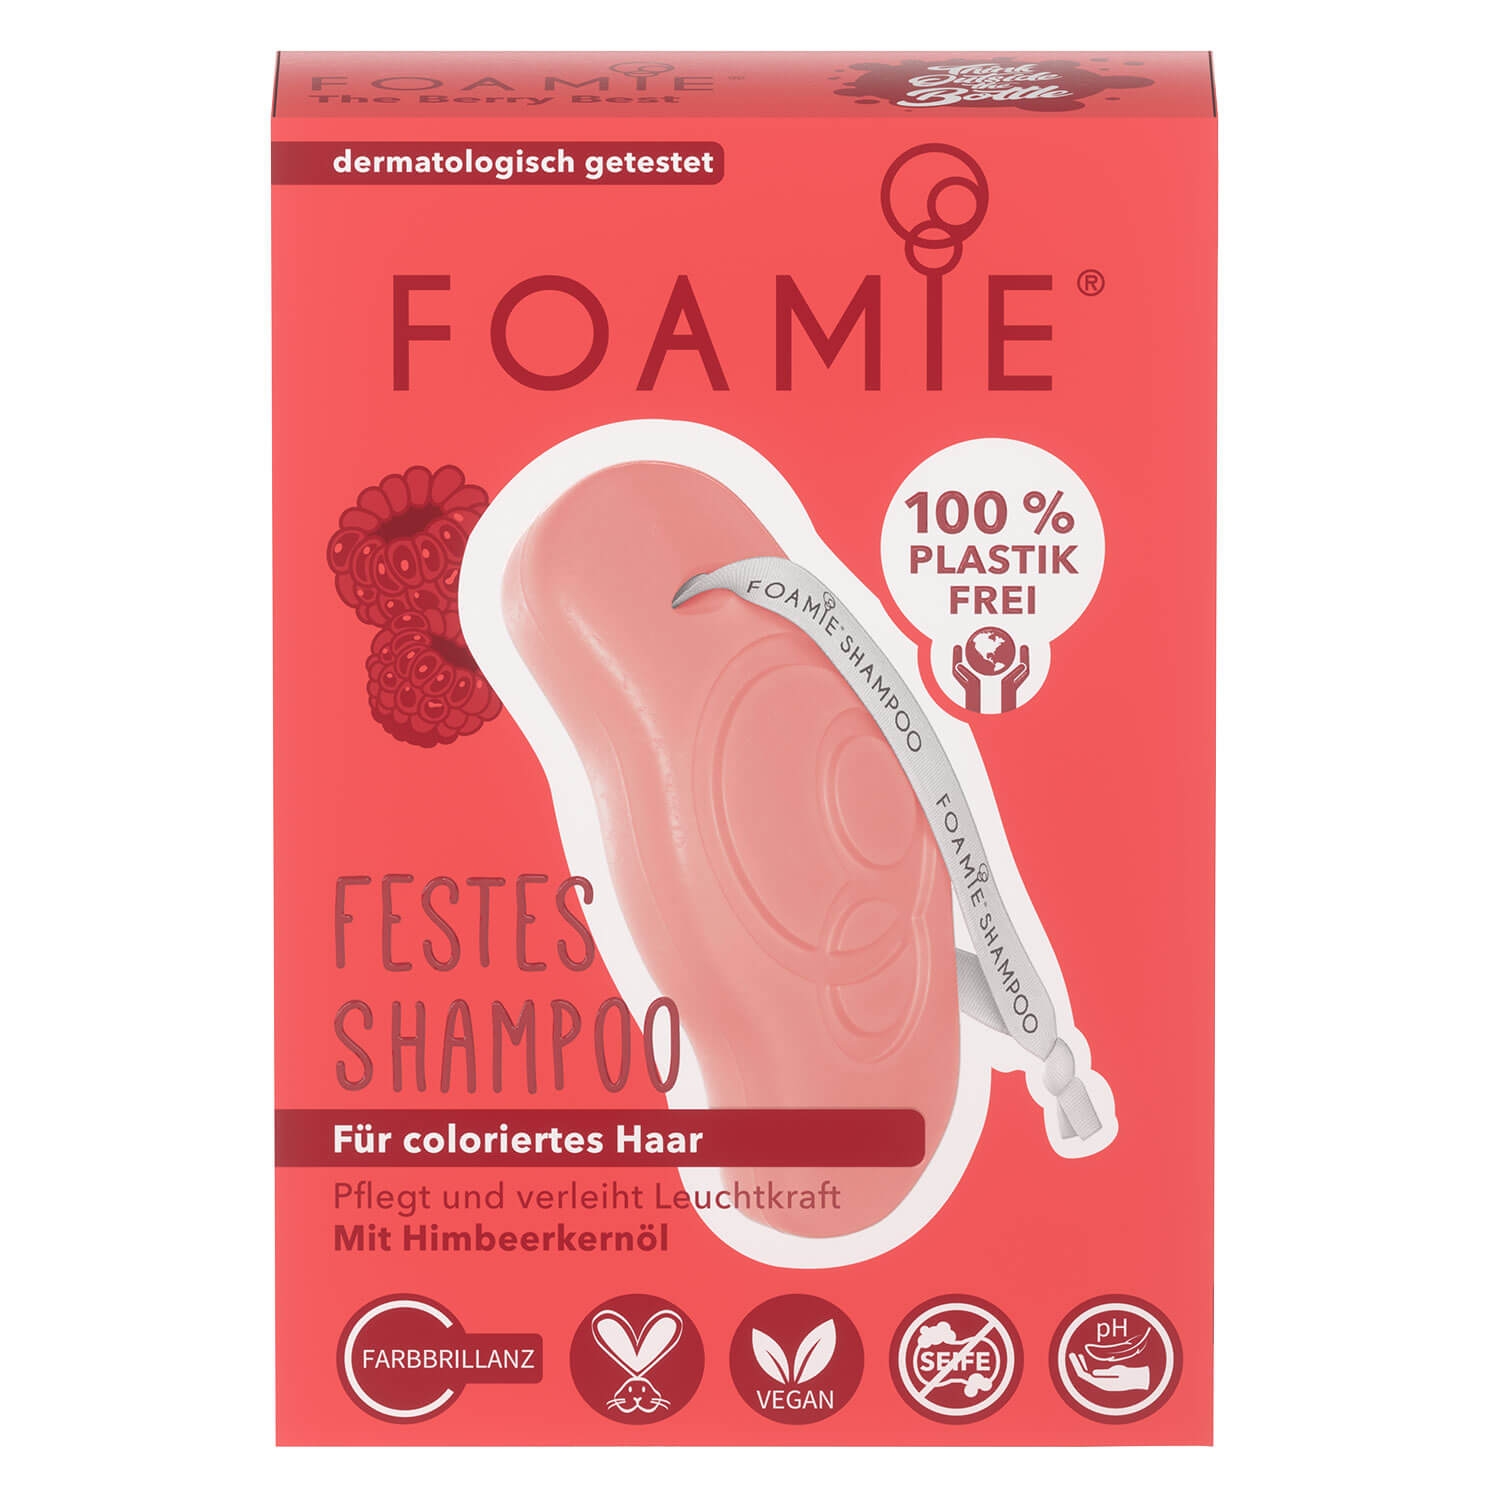 Product image from Foamie - Festes Shampoo The Berry Best